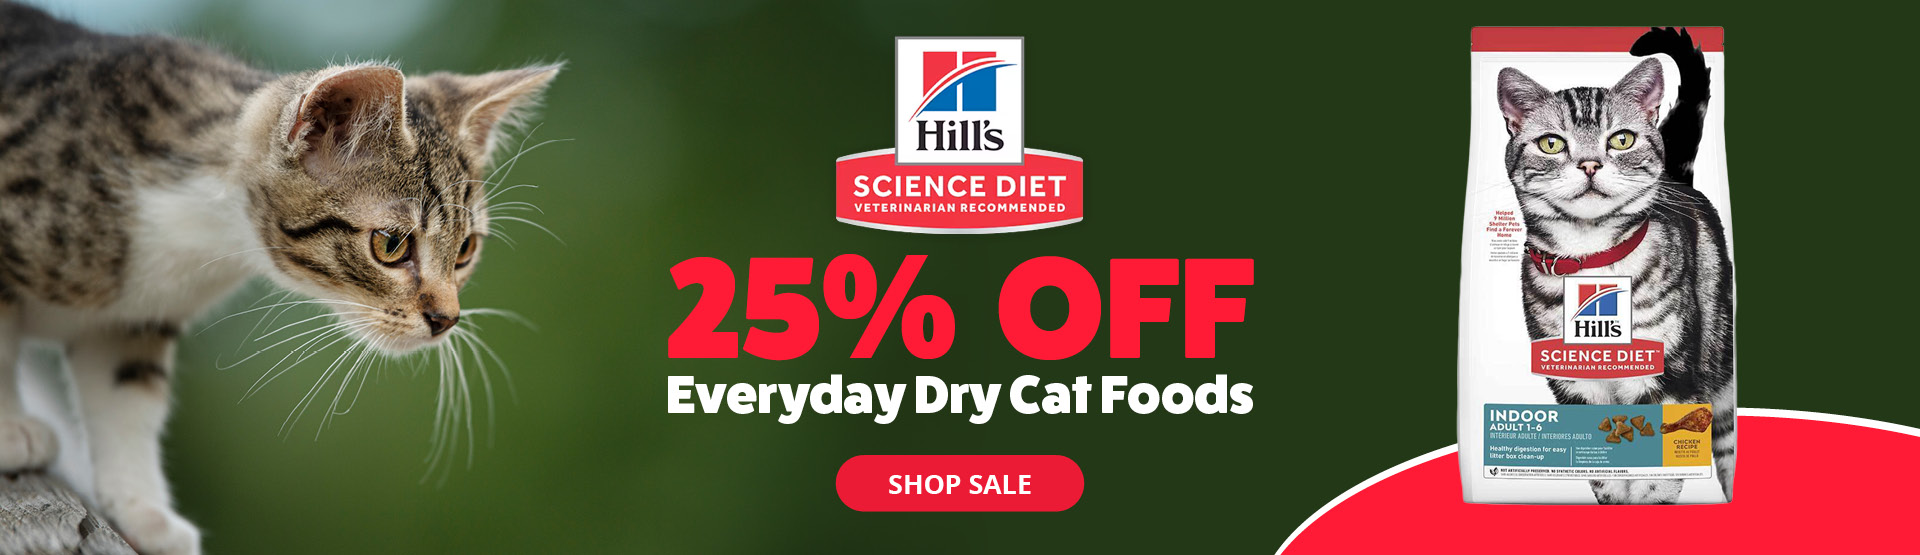 Hill's Science diet Everyday Dry Cat Foods 25% off